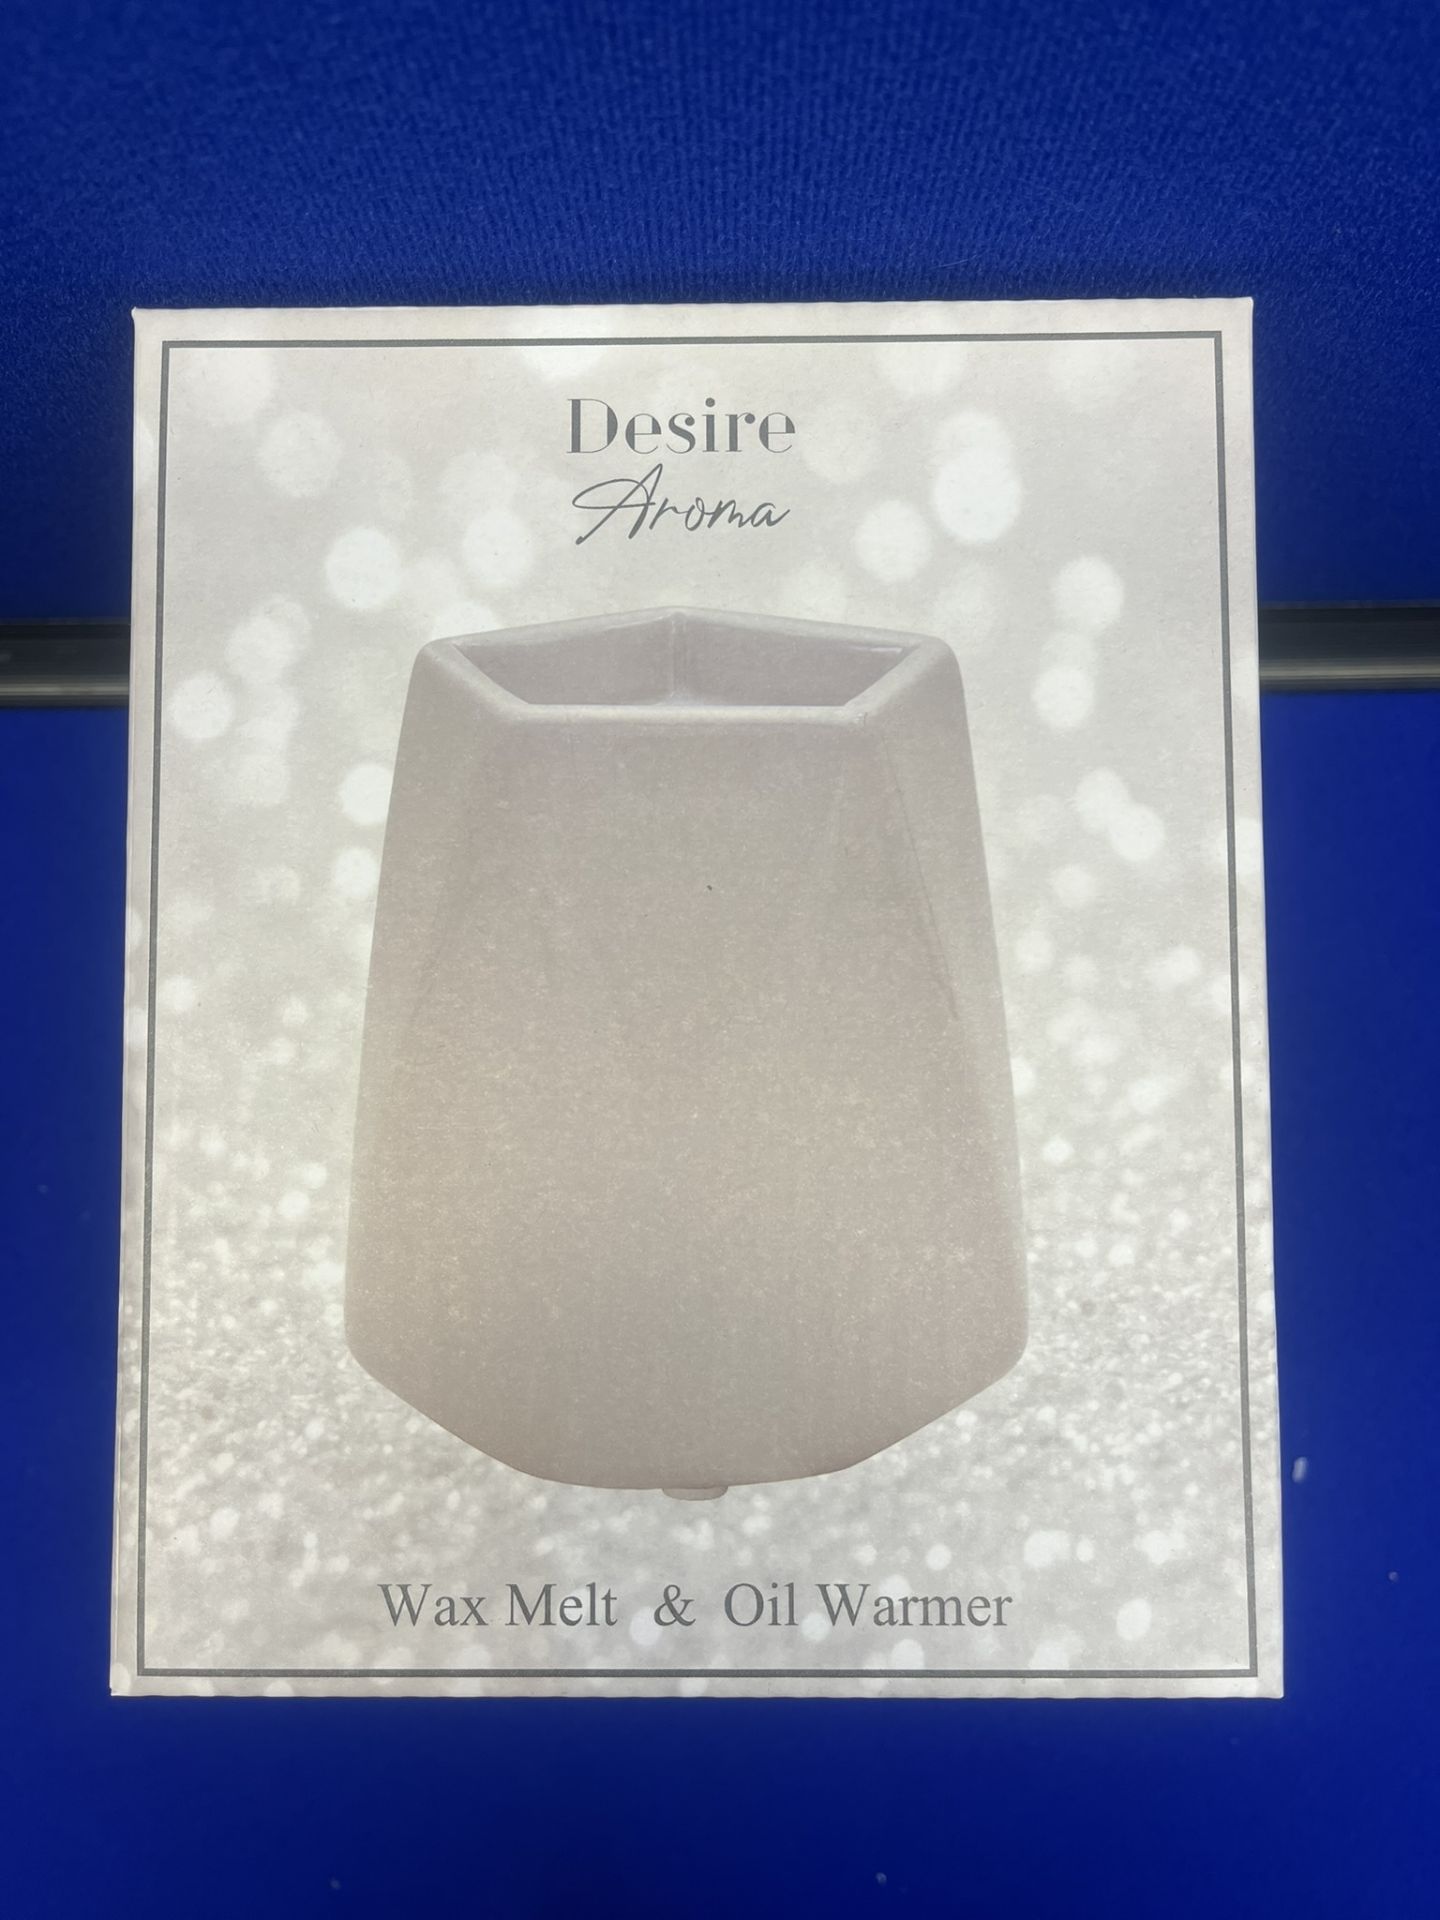 10 x Lesser & Pavey Grey Desire Aroma Wax Melt & Oil Warmers - Image 4 of 5